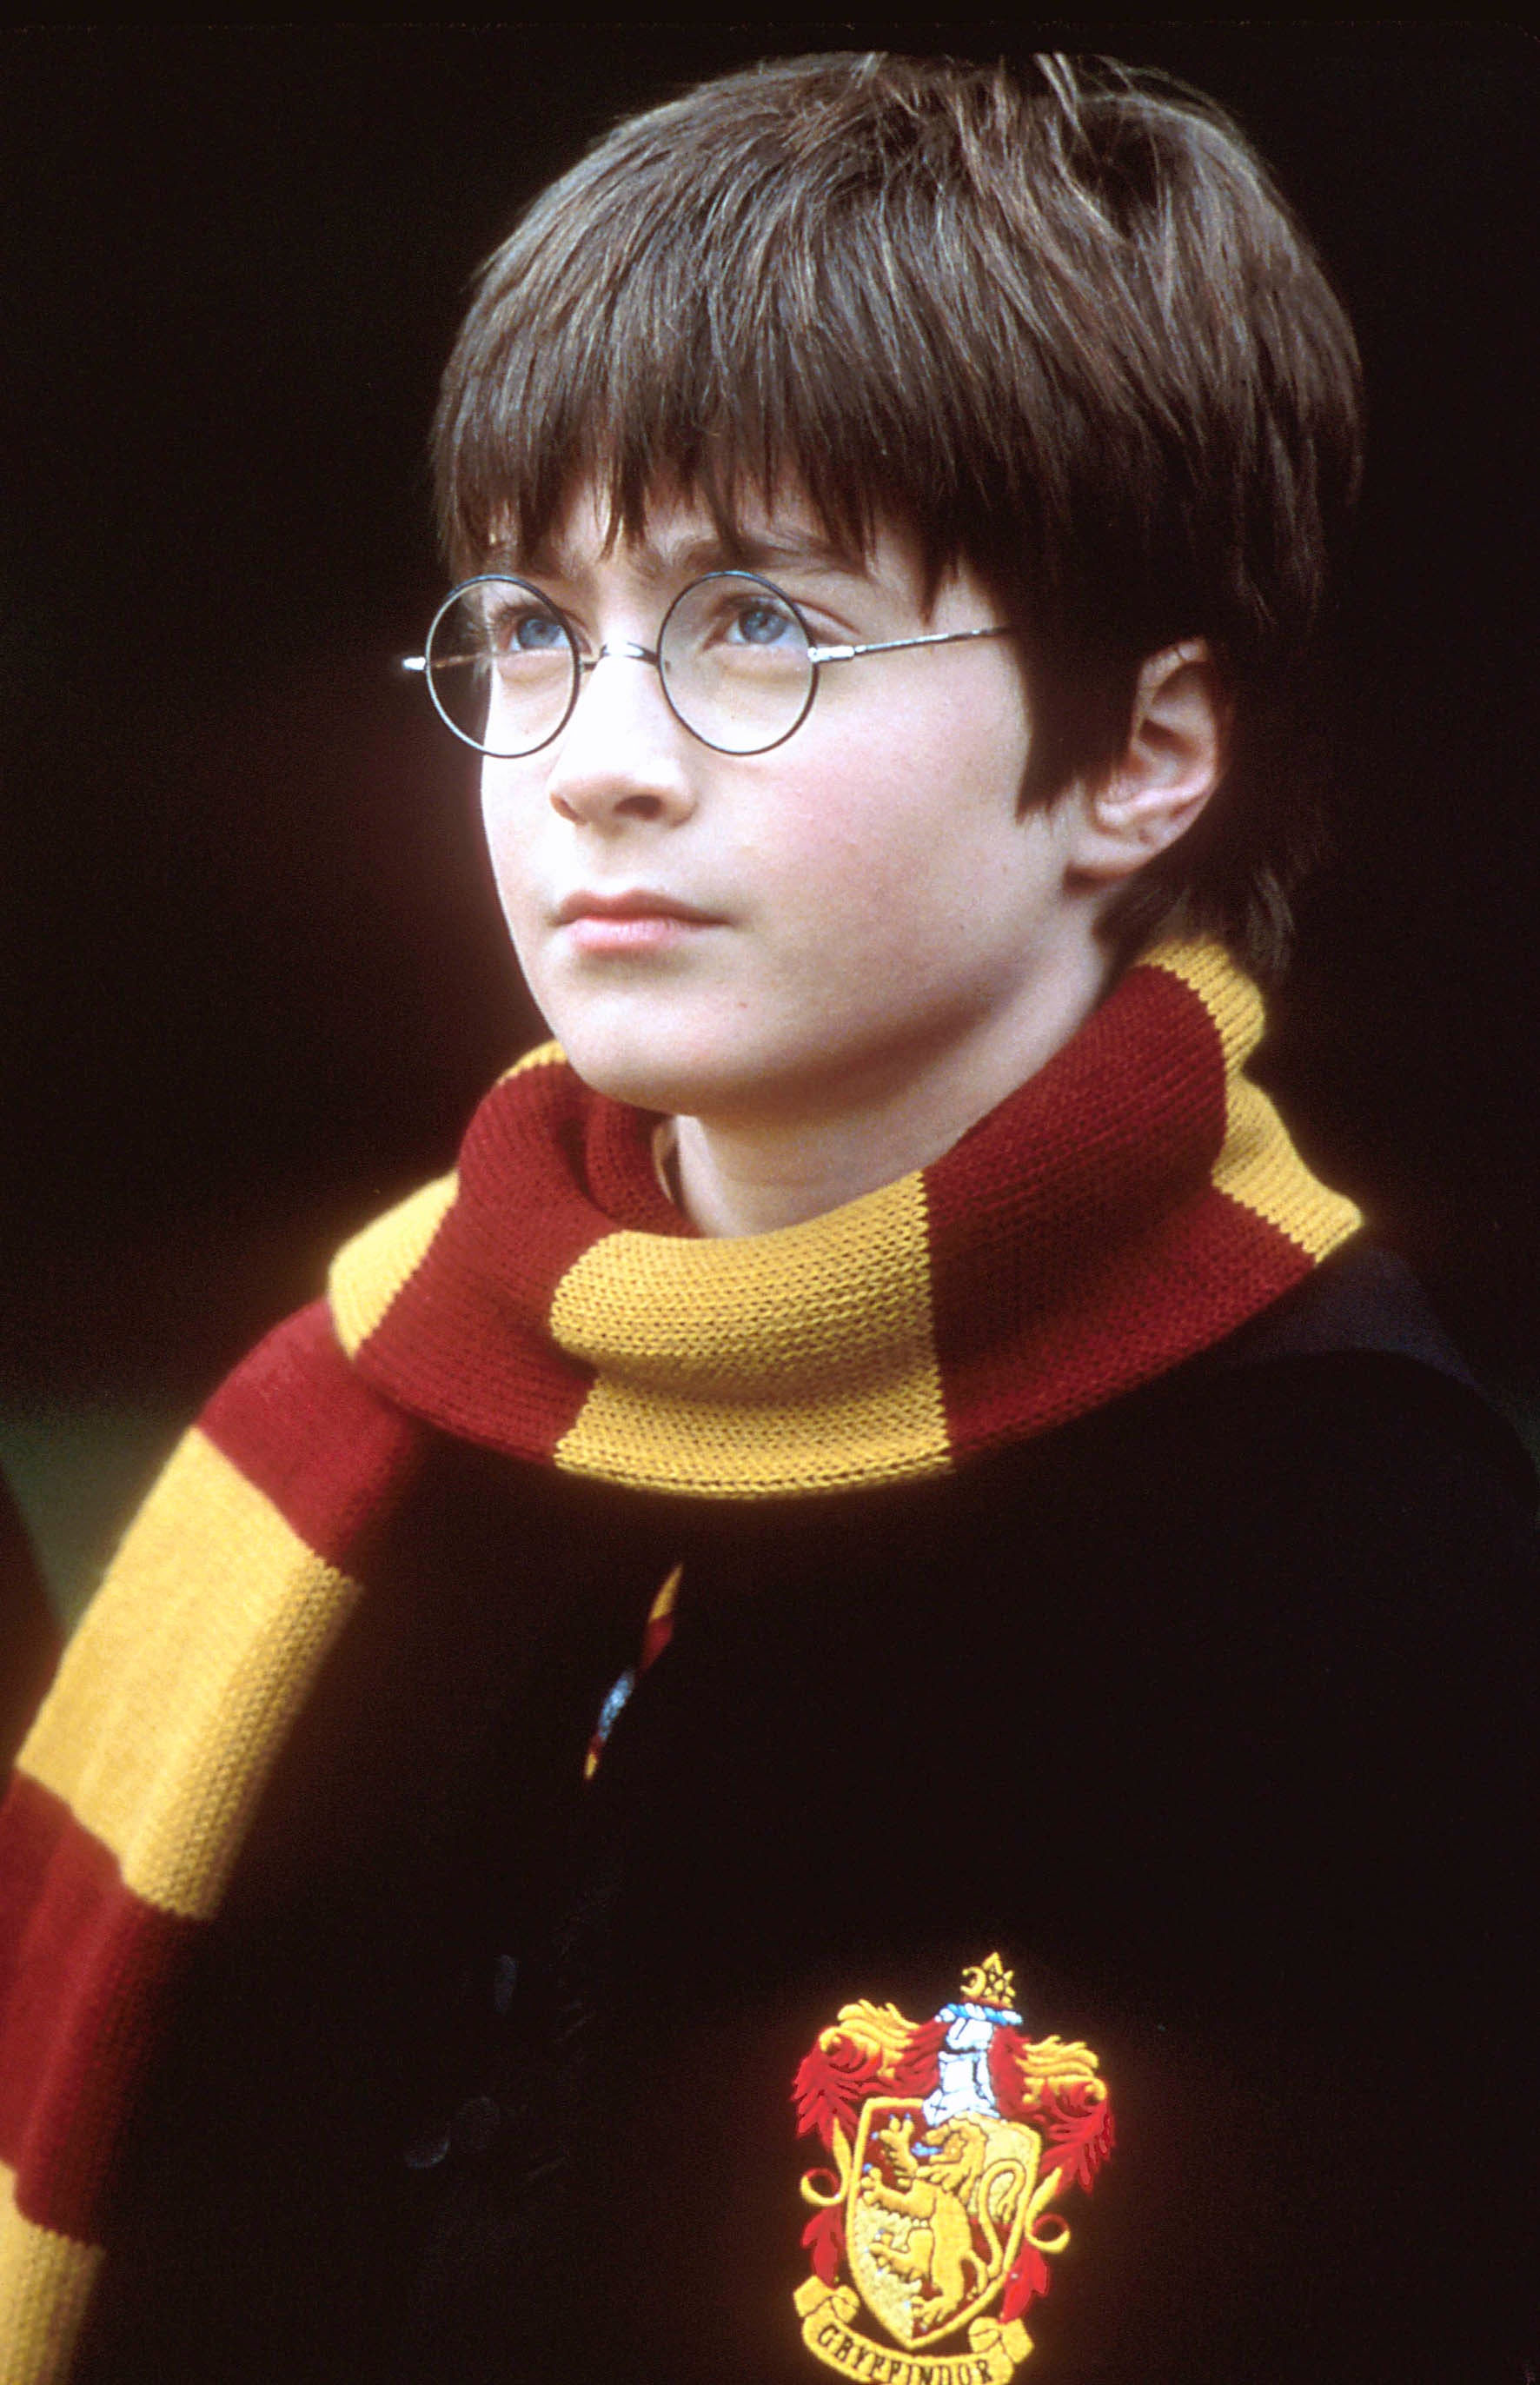 Radcliffe in ‘Harry Potter and the Philosopher’s Stone’, where Holmes was his stunt double